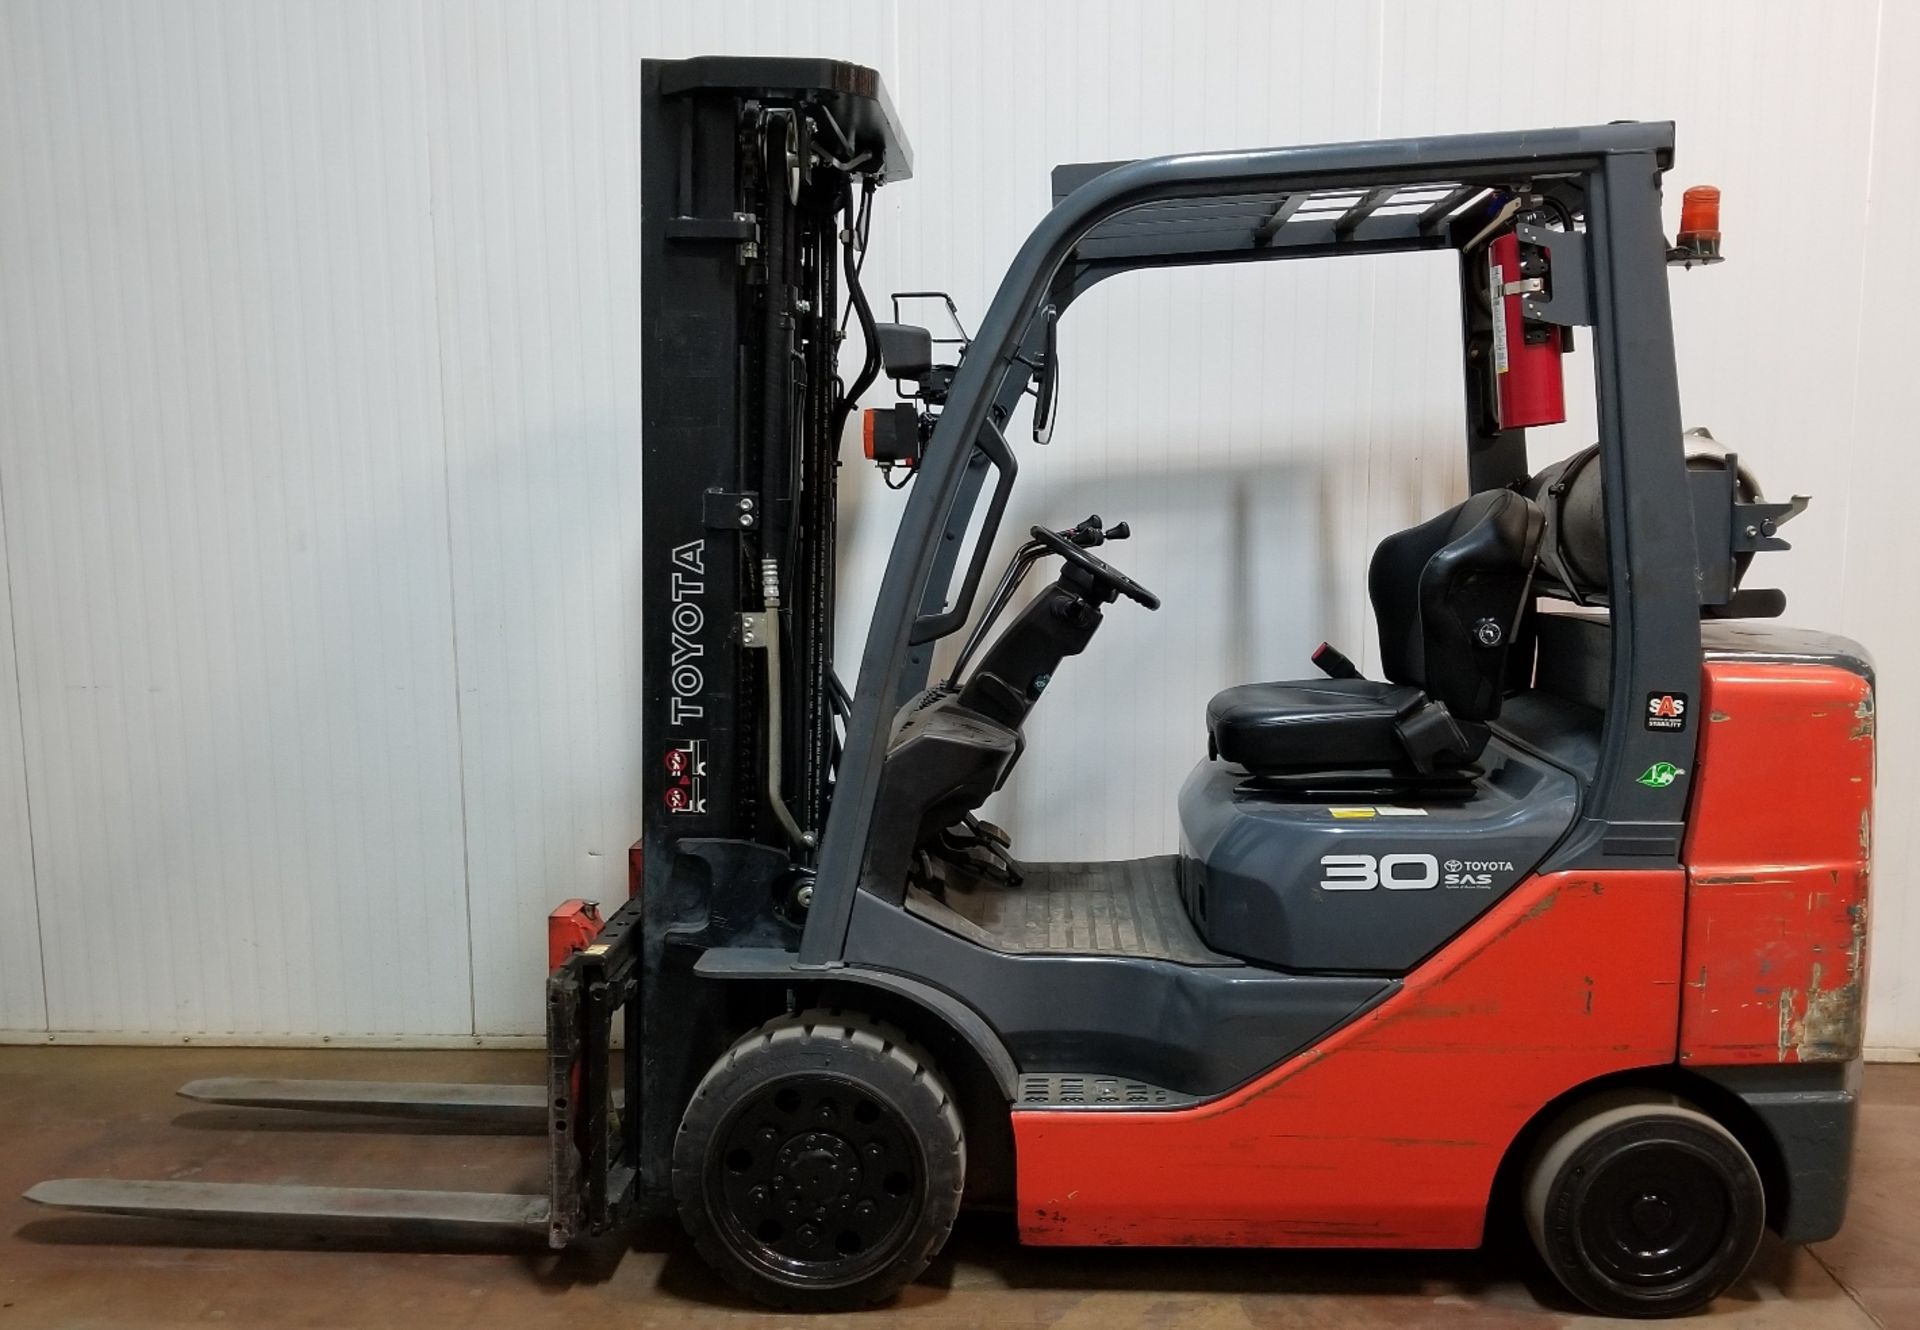 TOYOTA (2015) 8FGCU30 6,000 LB. CAPACITY LPG FORKLIFT WITH 187" MAX. LIFT HEIGHT, 3-STAGE MAST, SIDE - Image 2 of 2